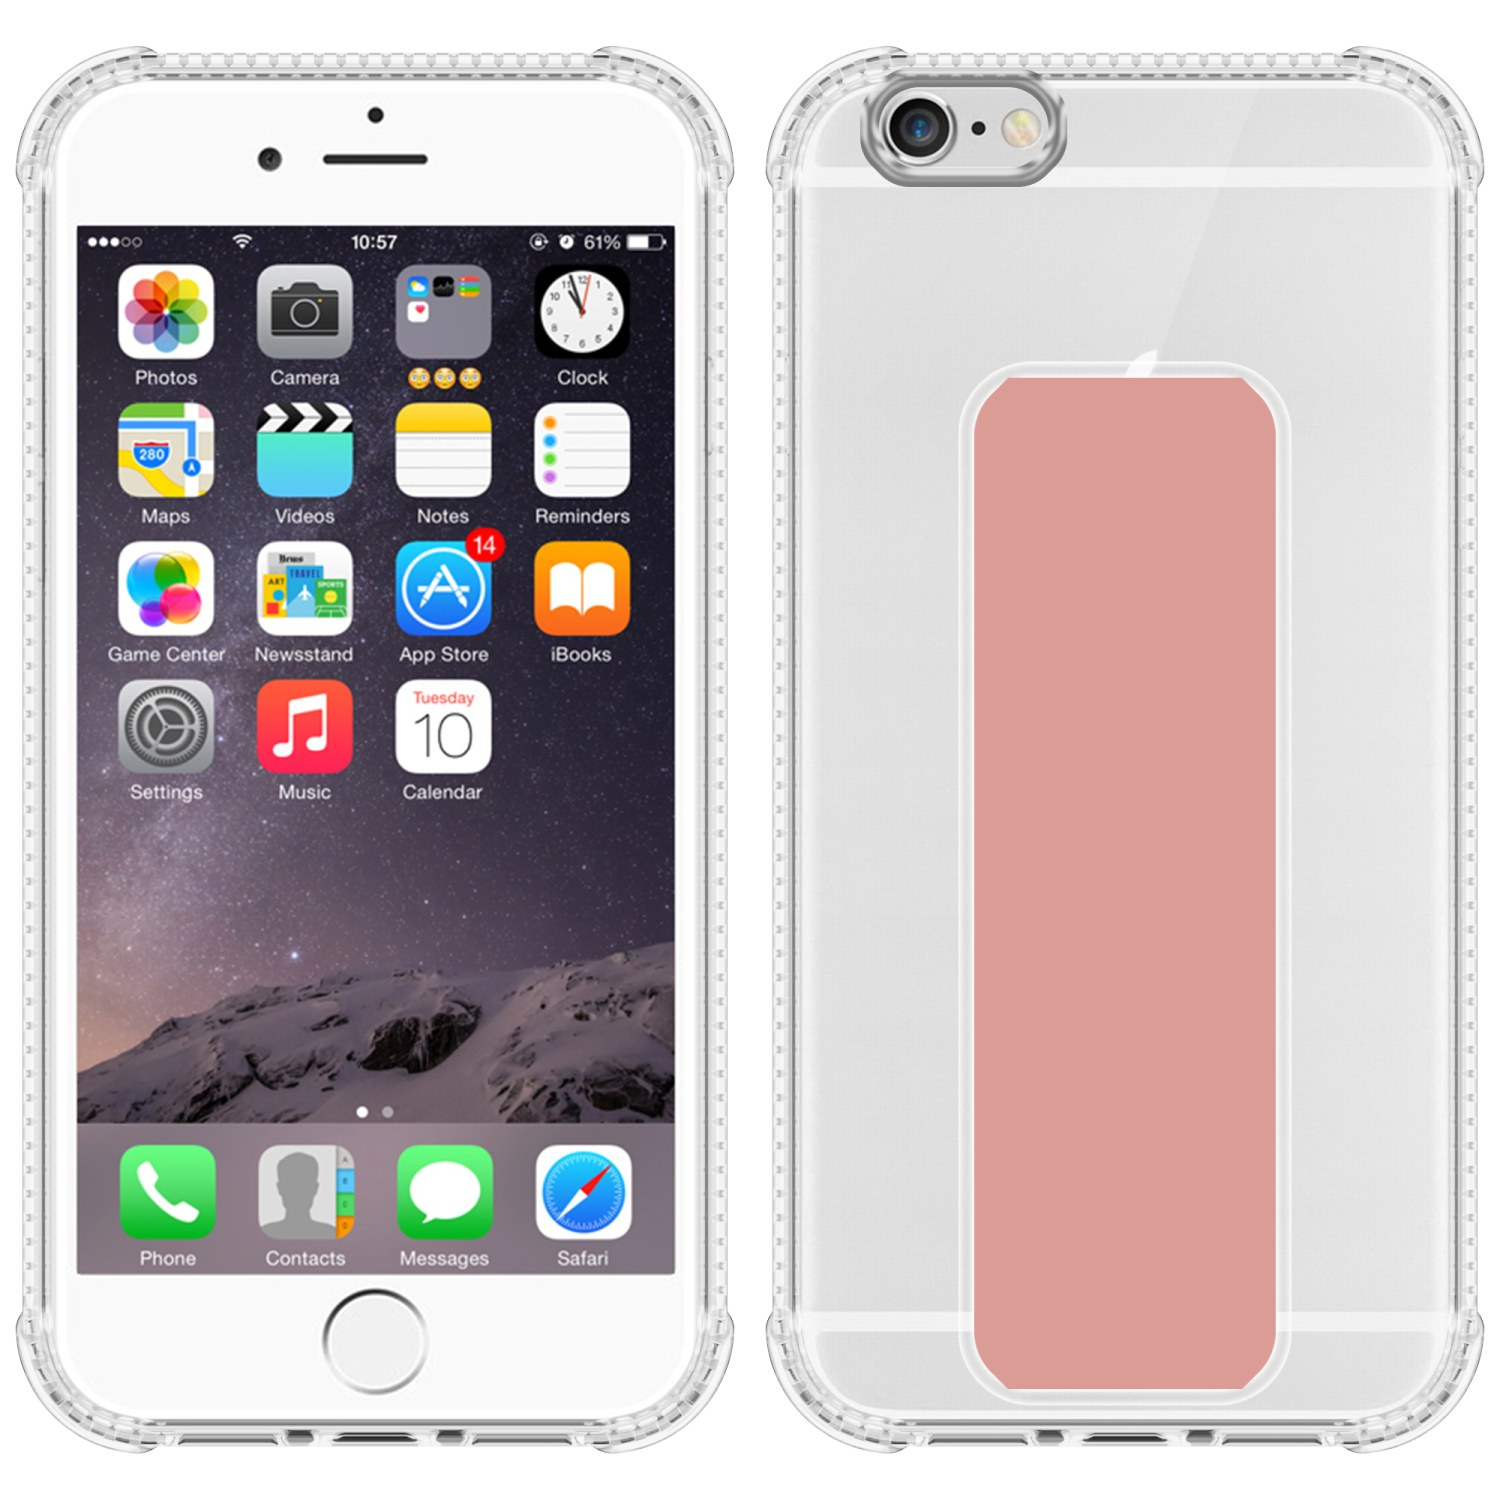 PLUS 6 Hülle iPhone und 6S Apple, CADORABO mit Backcover, Halterung / PLUS, ROSA Standfunktion,